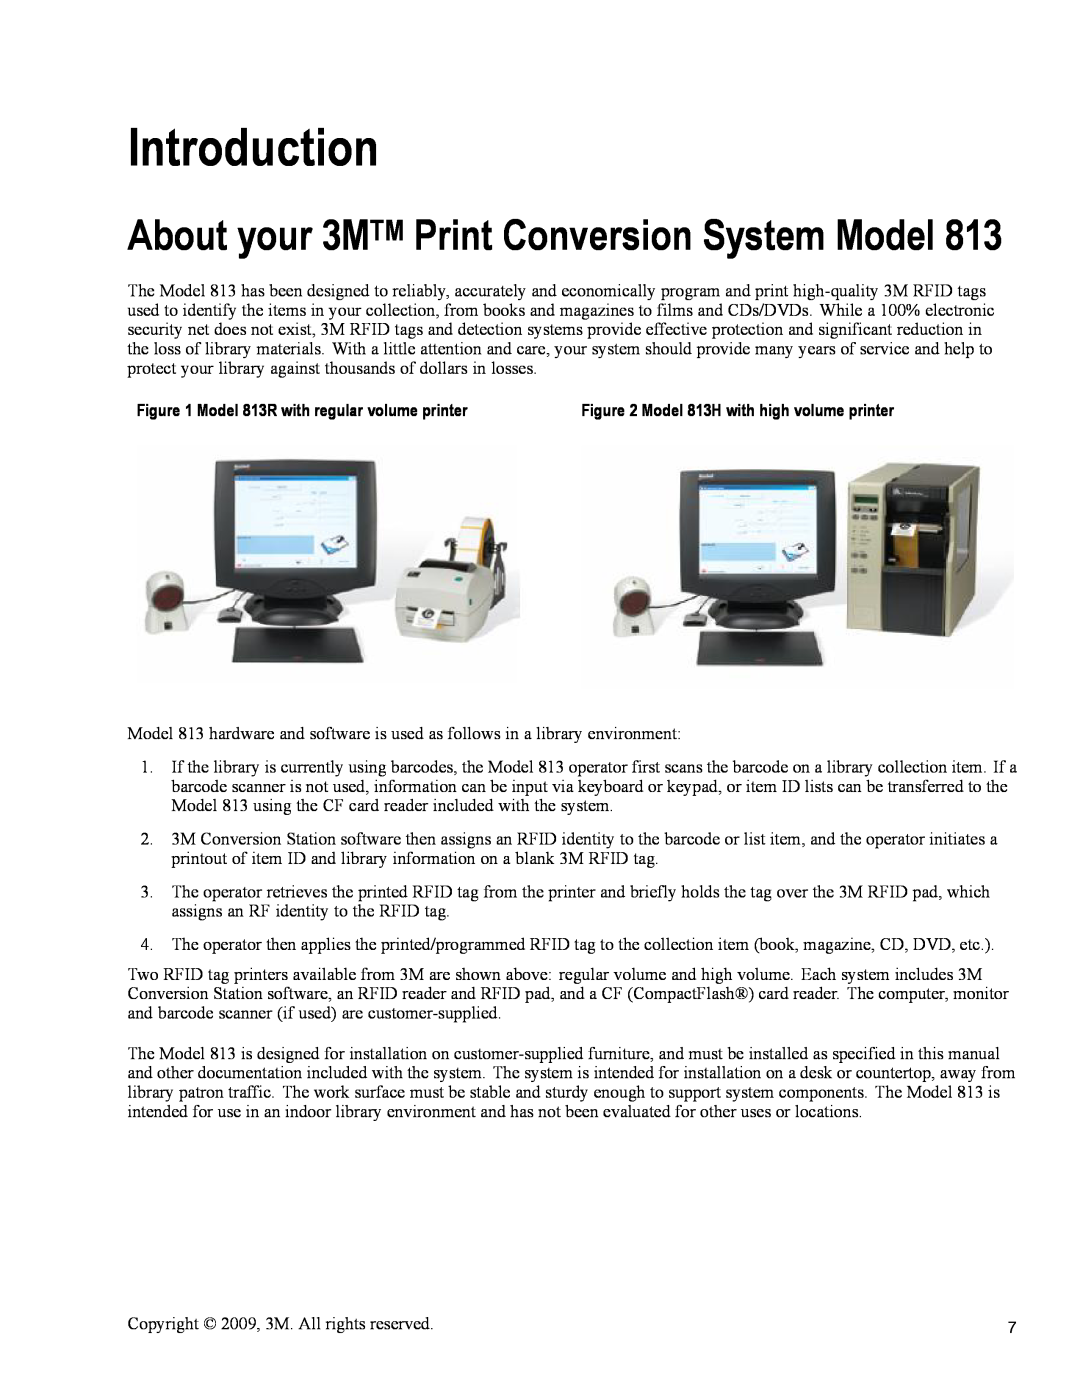 3M owner manual Introduction, About your 3MTM Print Conversion System Model, Model 813R with regular volume printer 